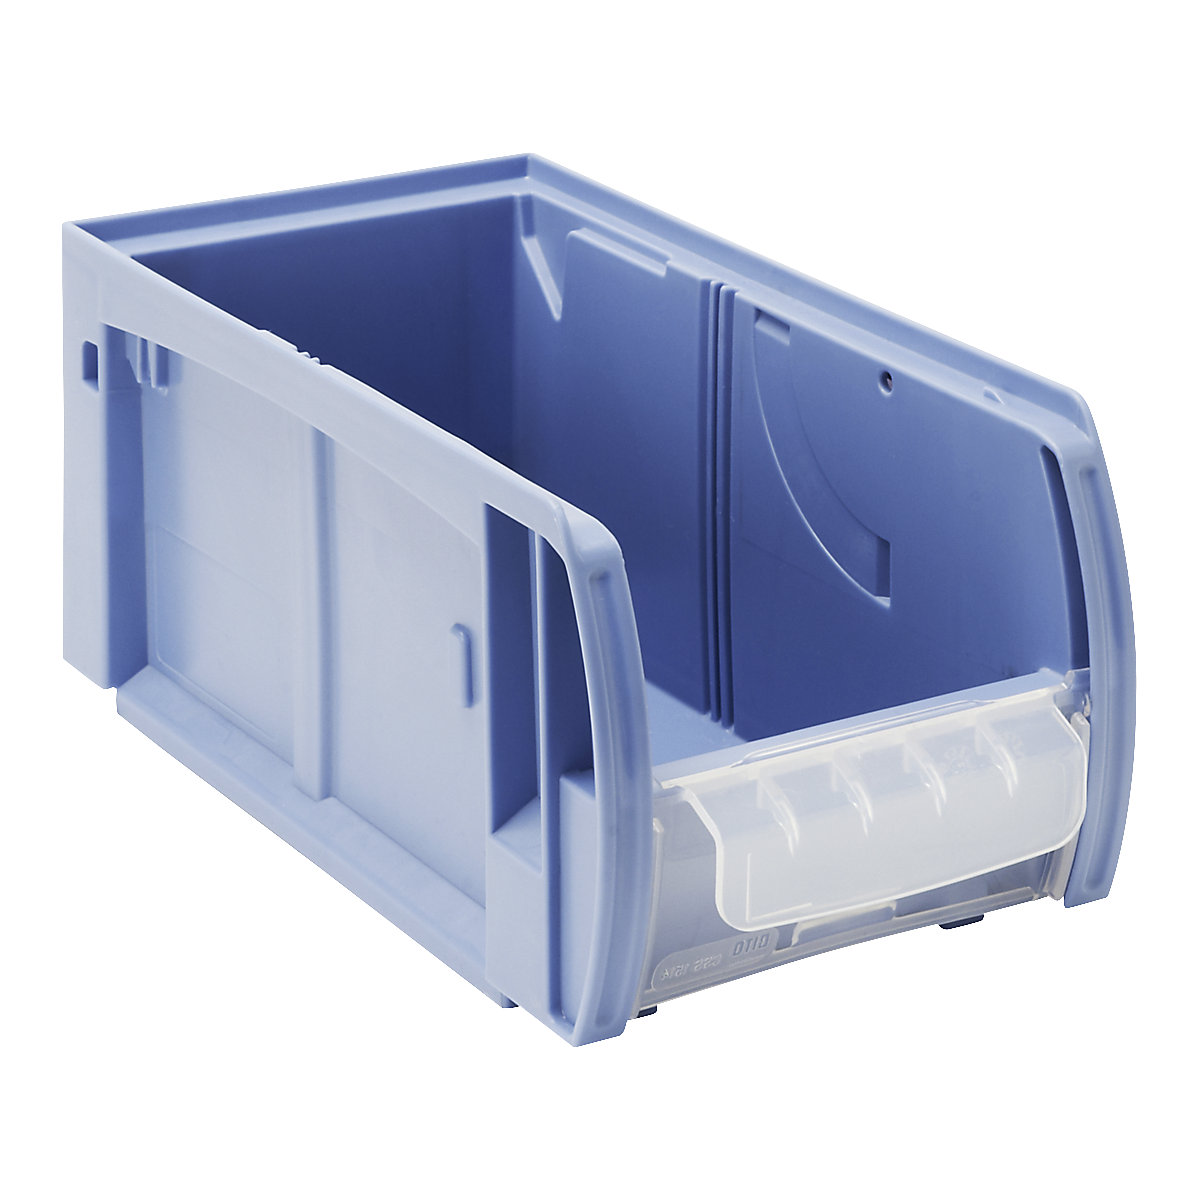 CTB C-parts container open fronted storage bin – BITO